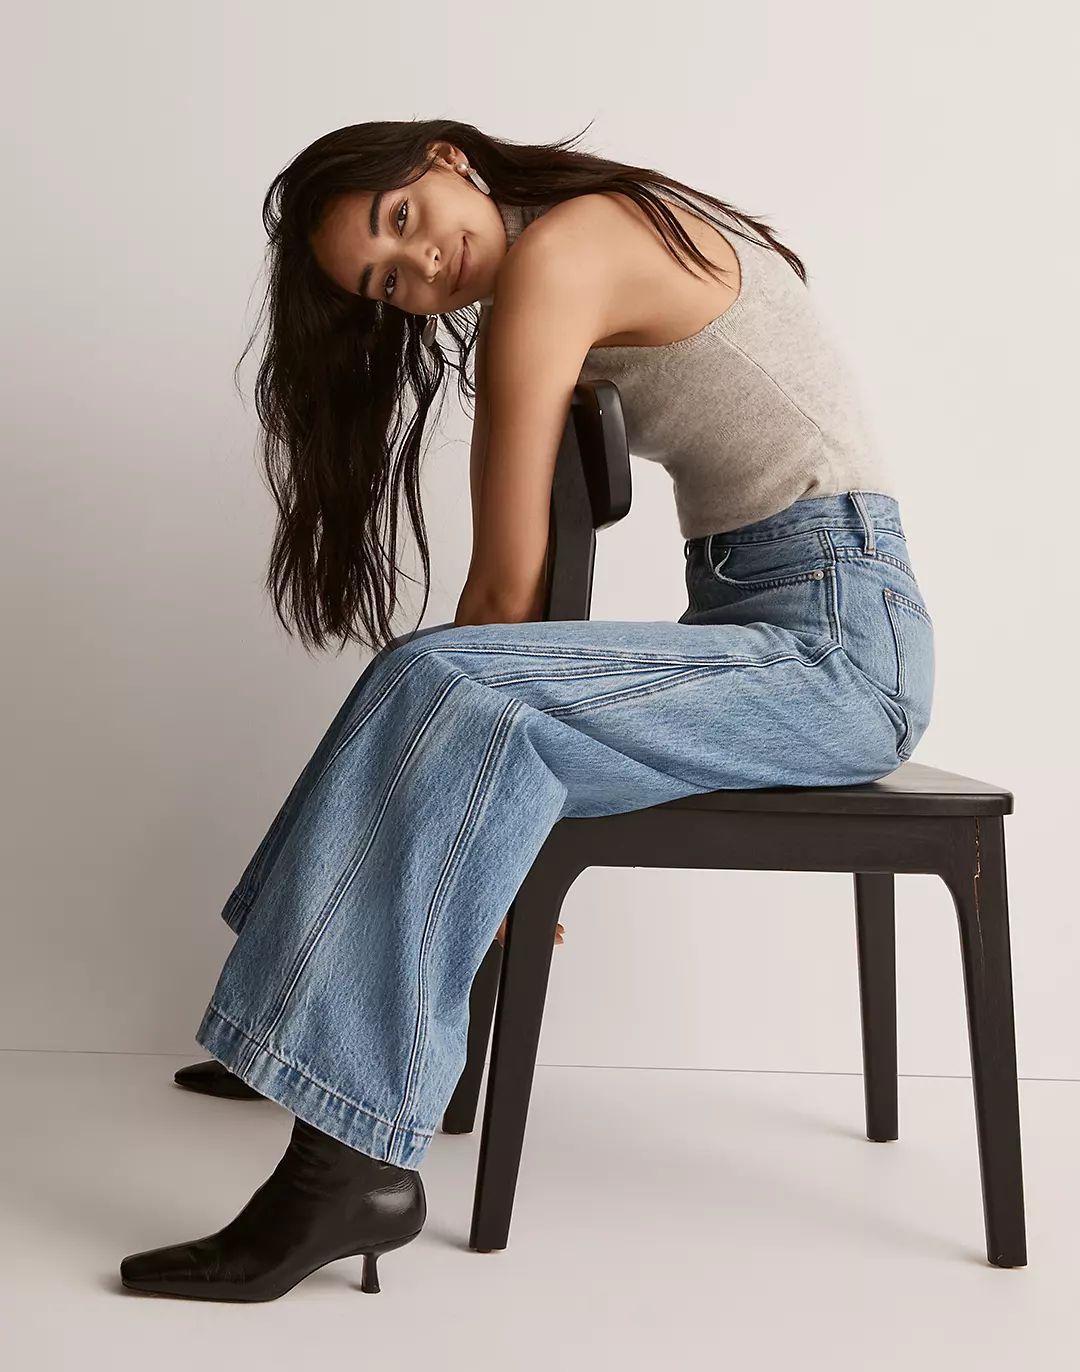 Superwide-Leg Jeans in Parson Wash: Inset Edition | Madewell